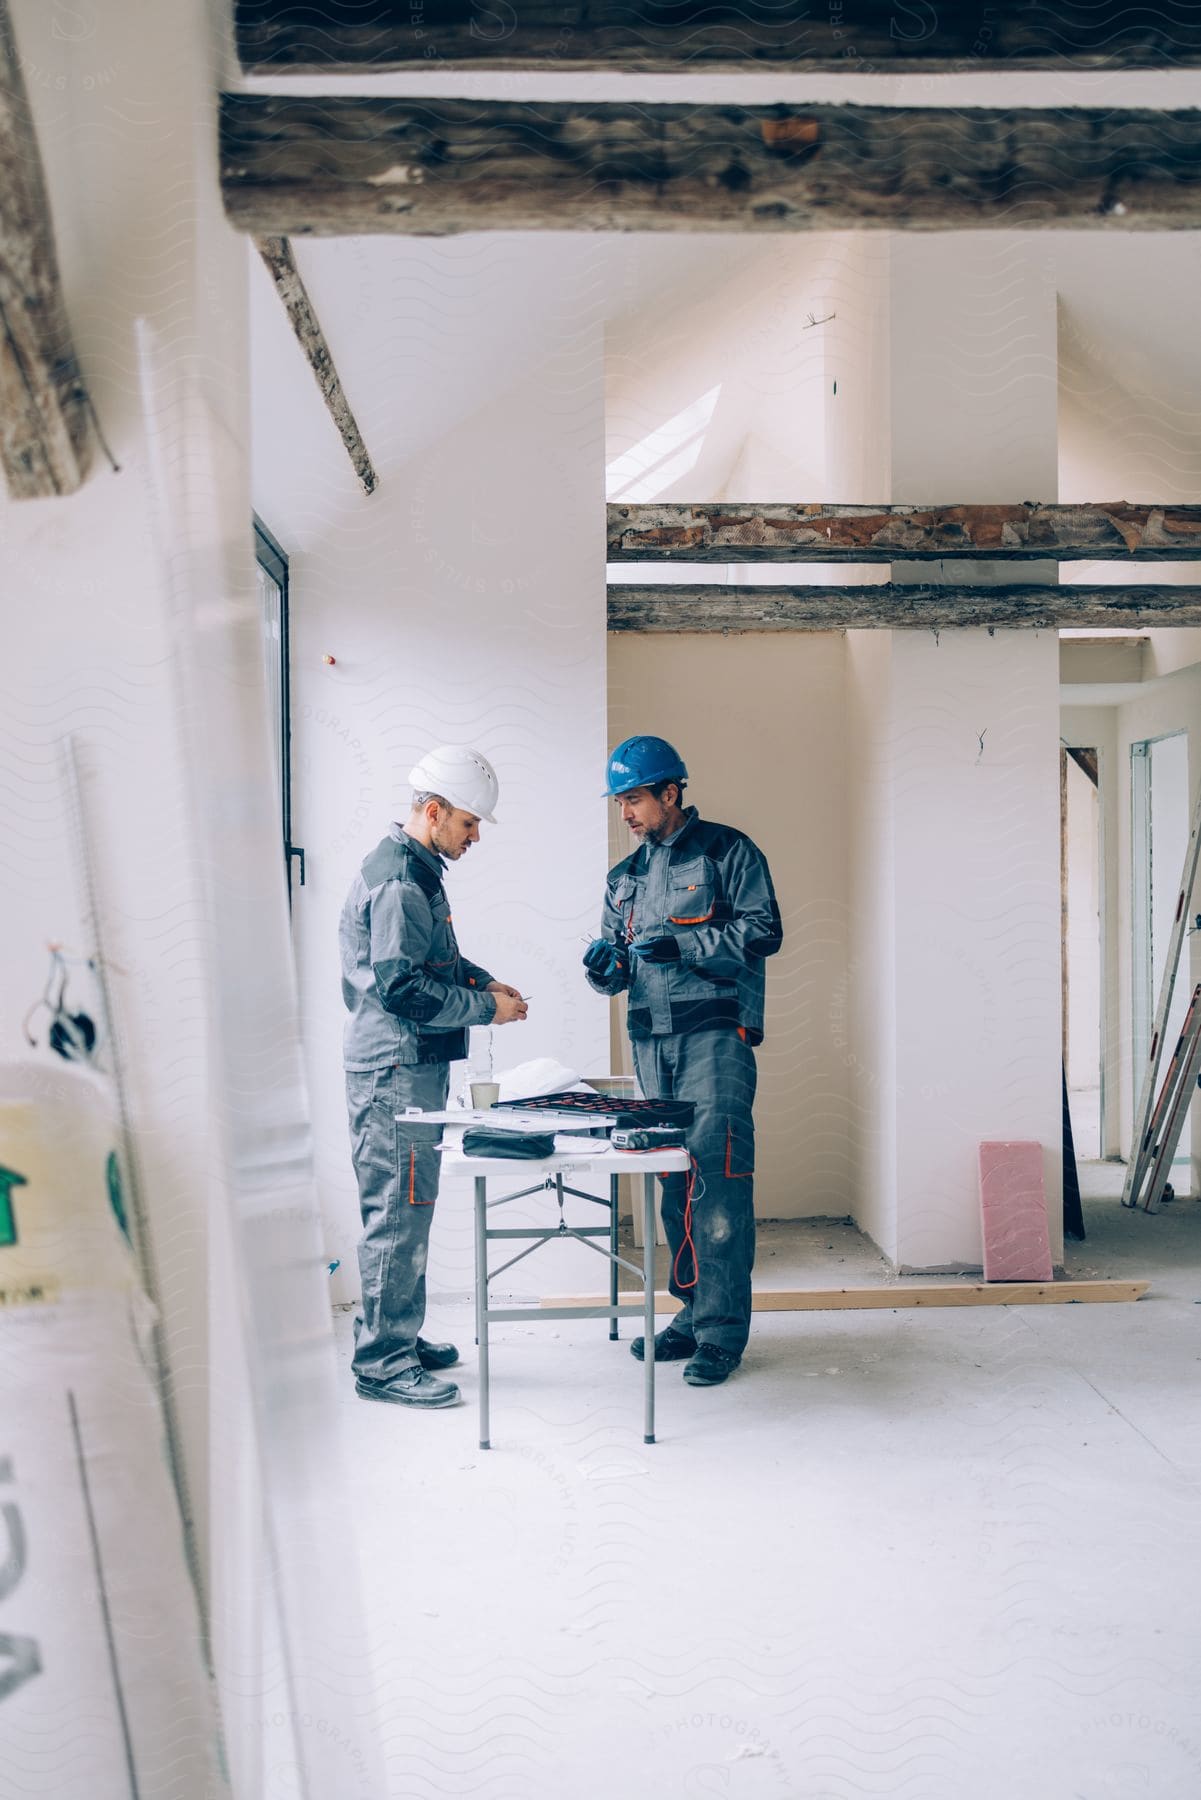 Two construction workers in work gear stand amidst renovation clutter (table and ladders) in a house under repair.